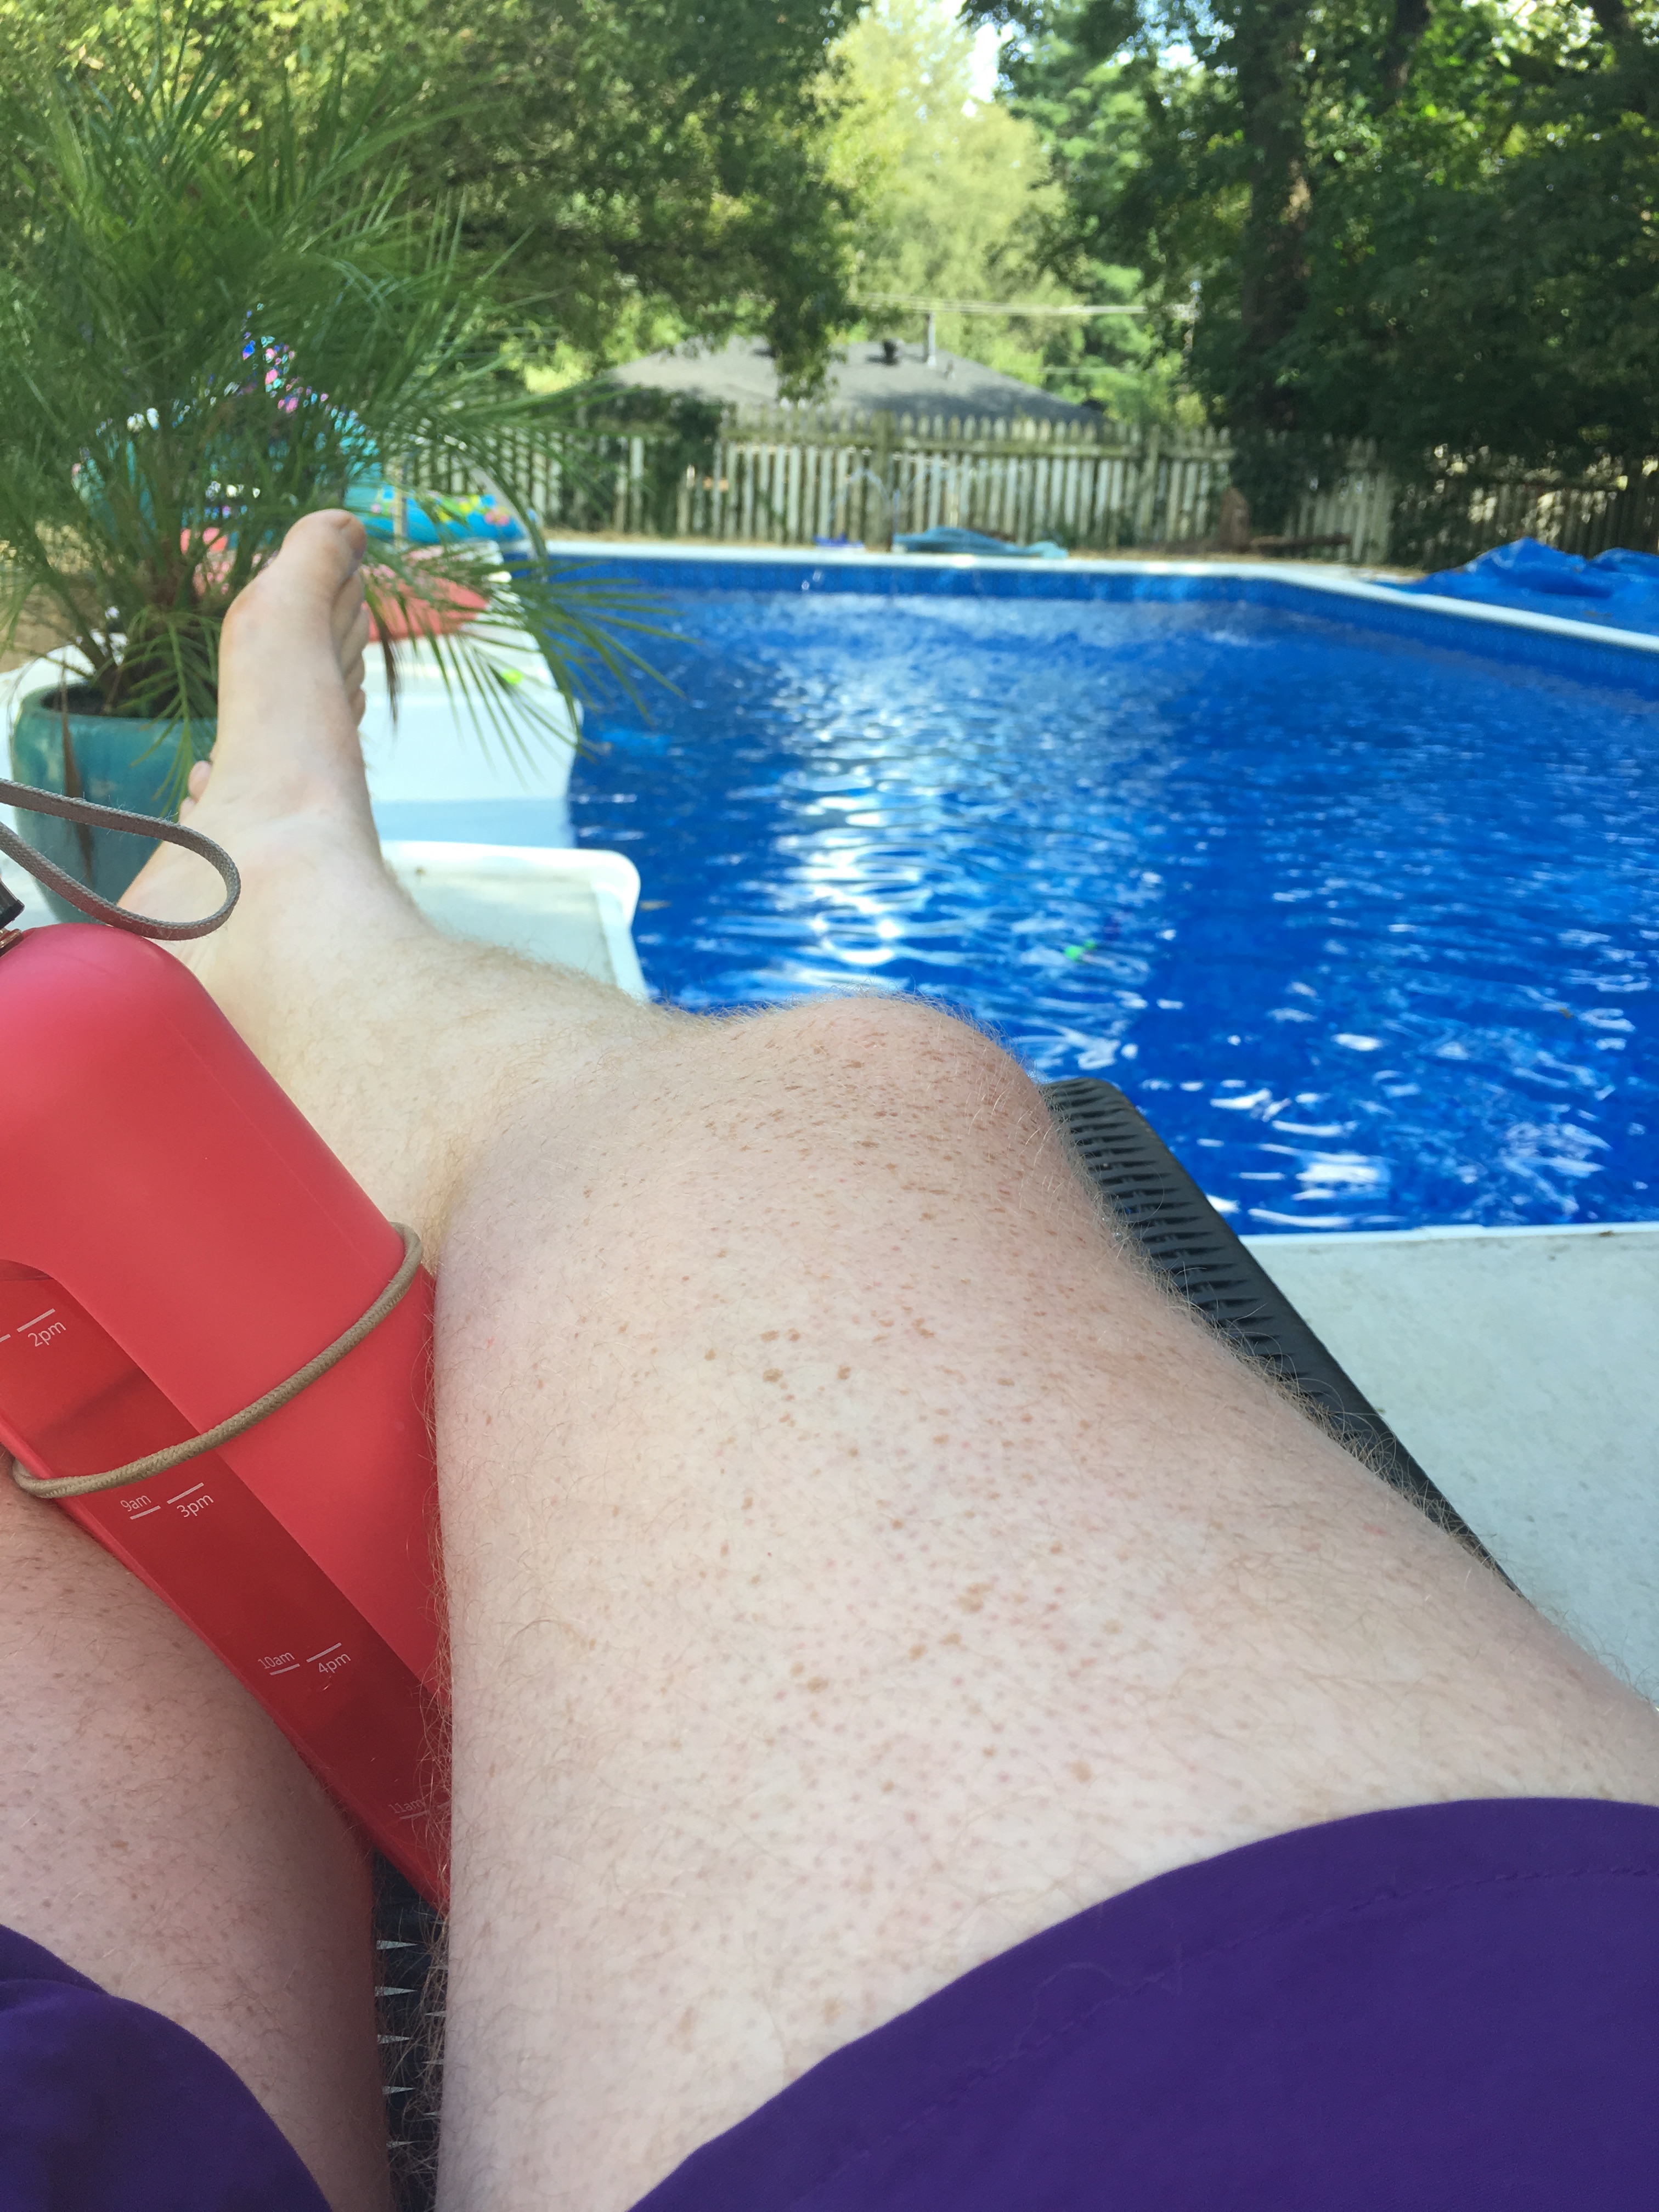 A nice picture of my legs and water bottle at my neighbor's pool